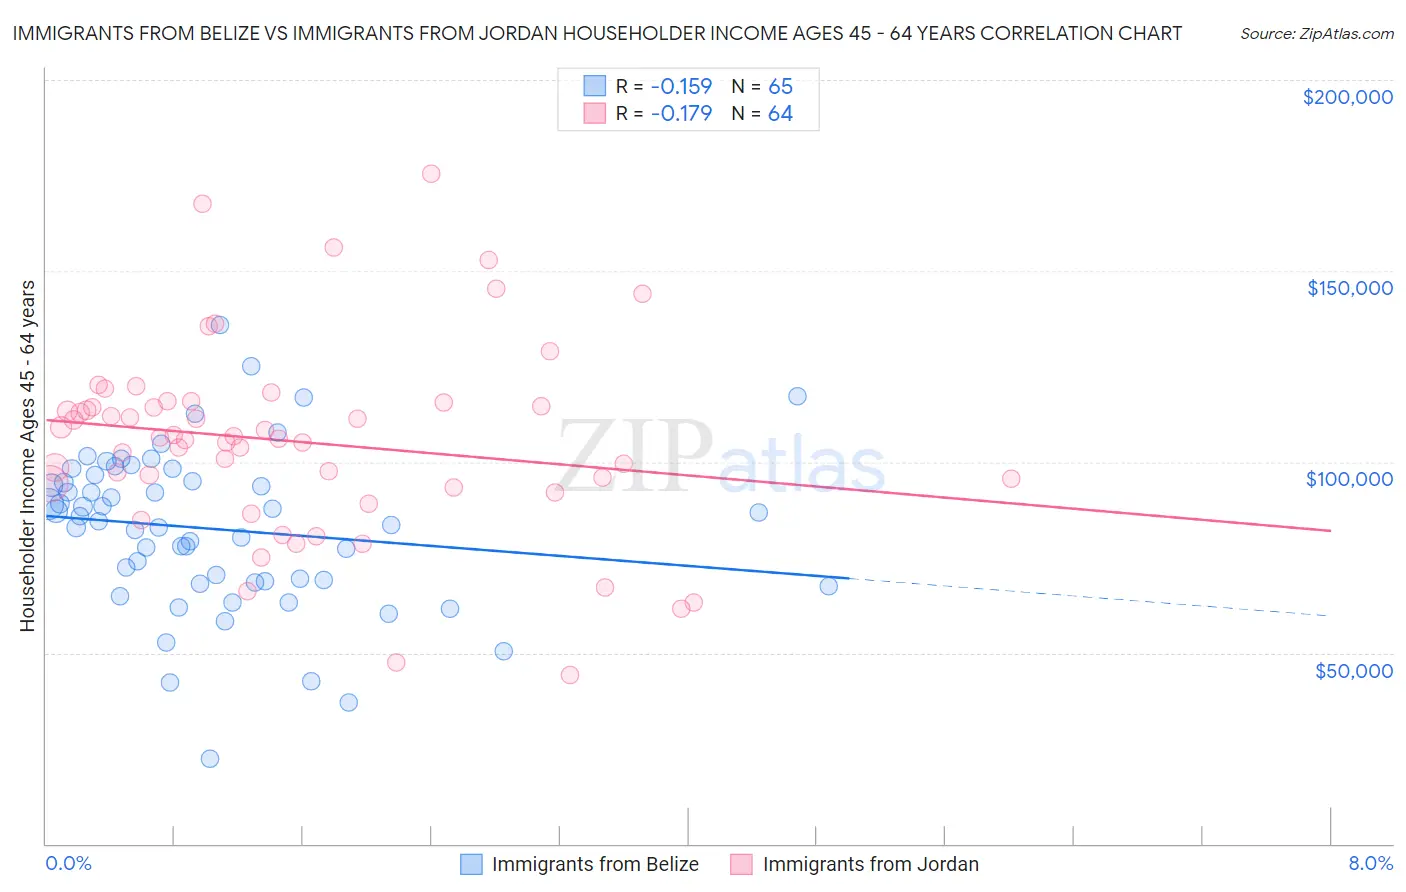 Immigrants from Belize vs Immigrants from Jordan Householder Income Ages 45 - 64 years